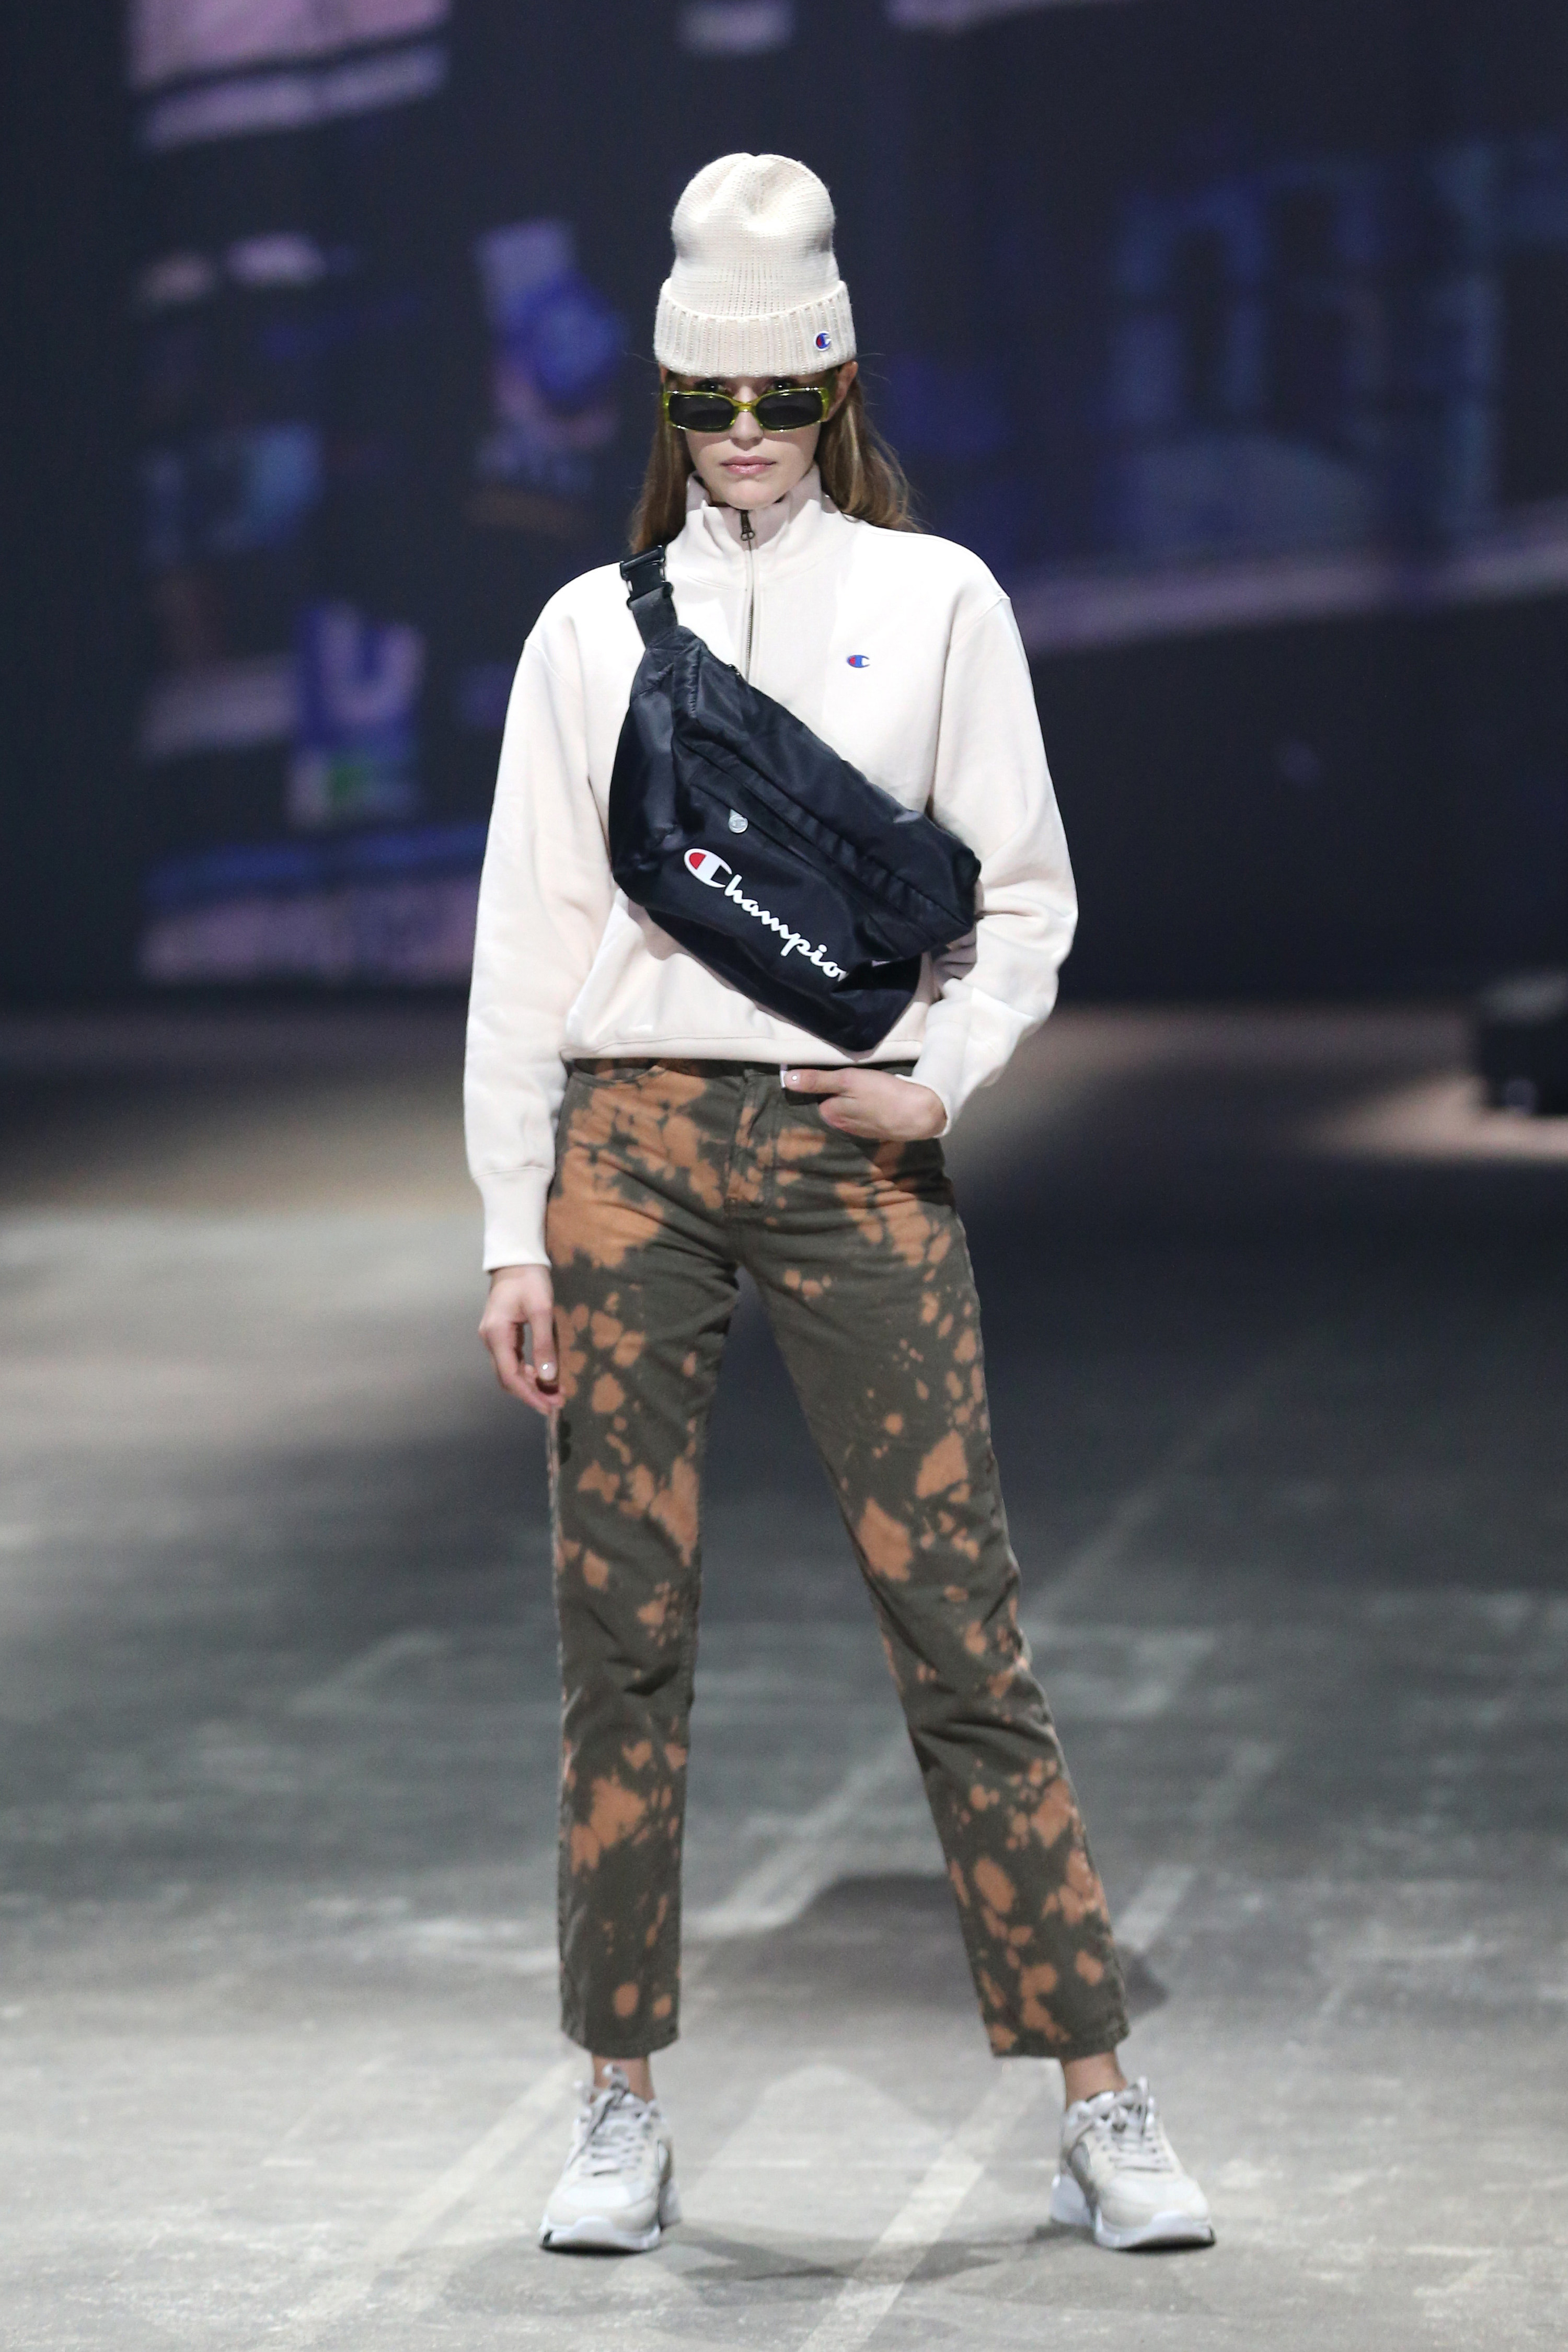 Runway model in Champion clothing